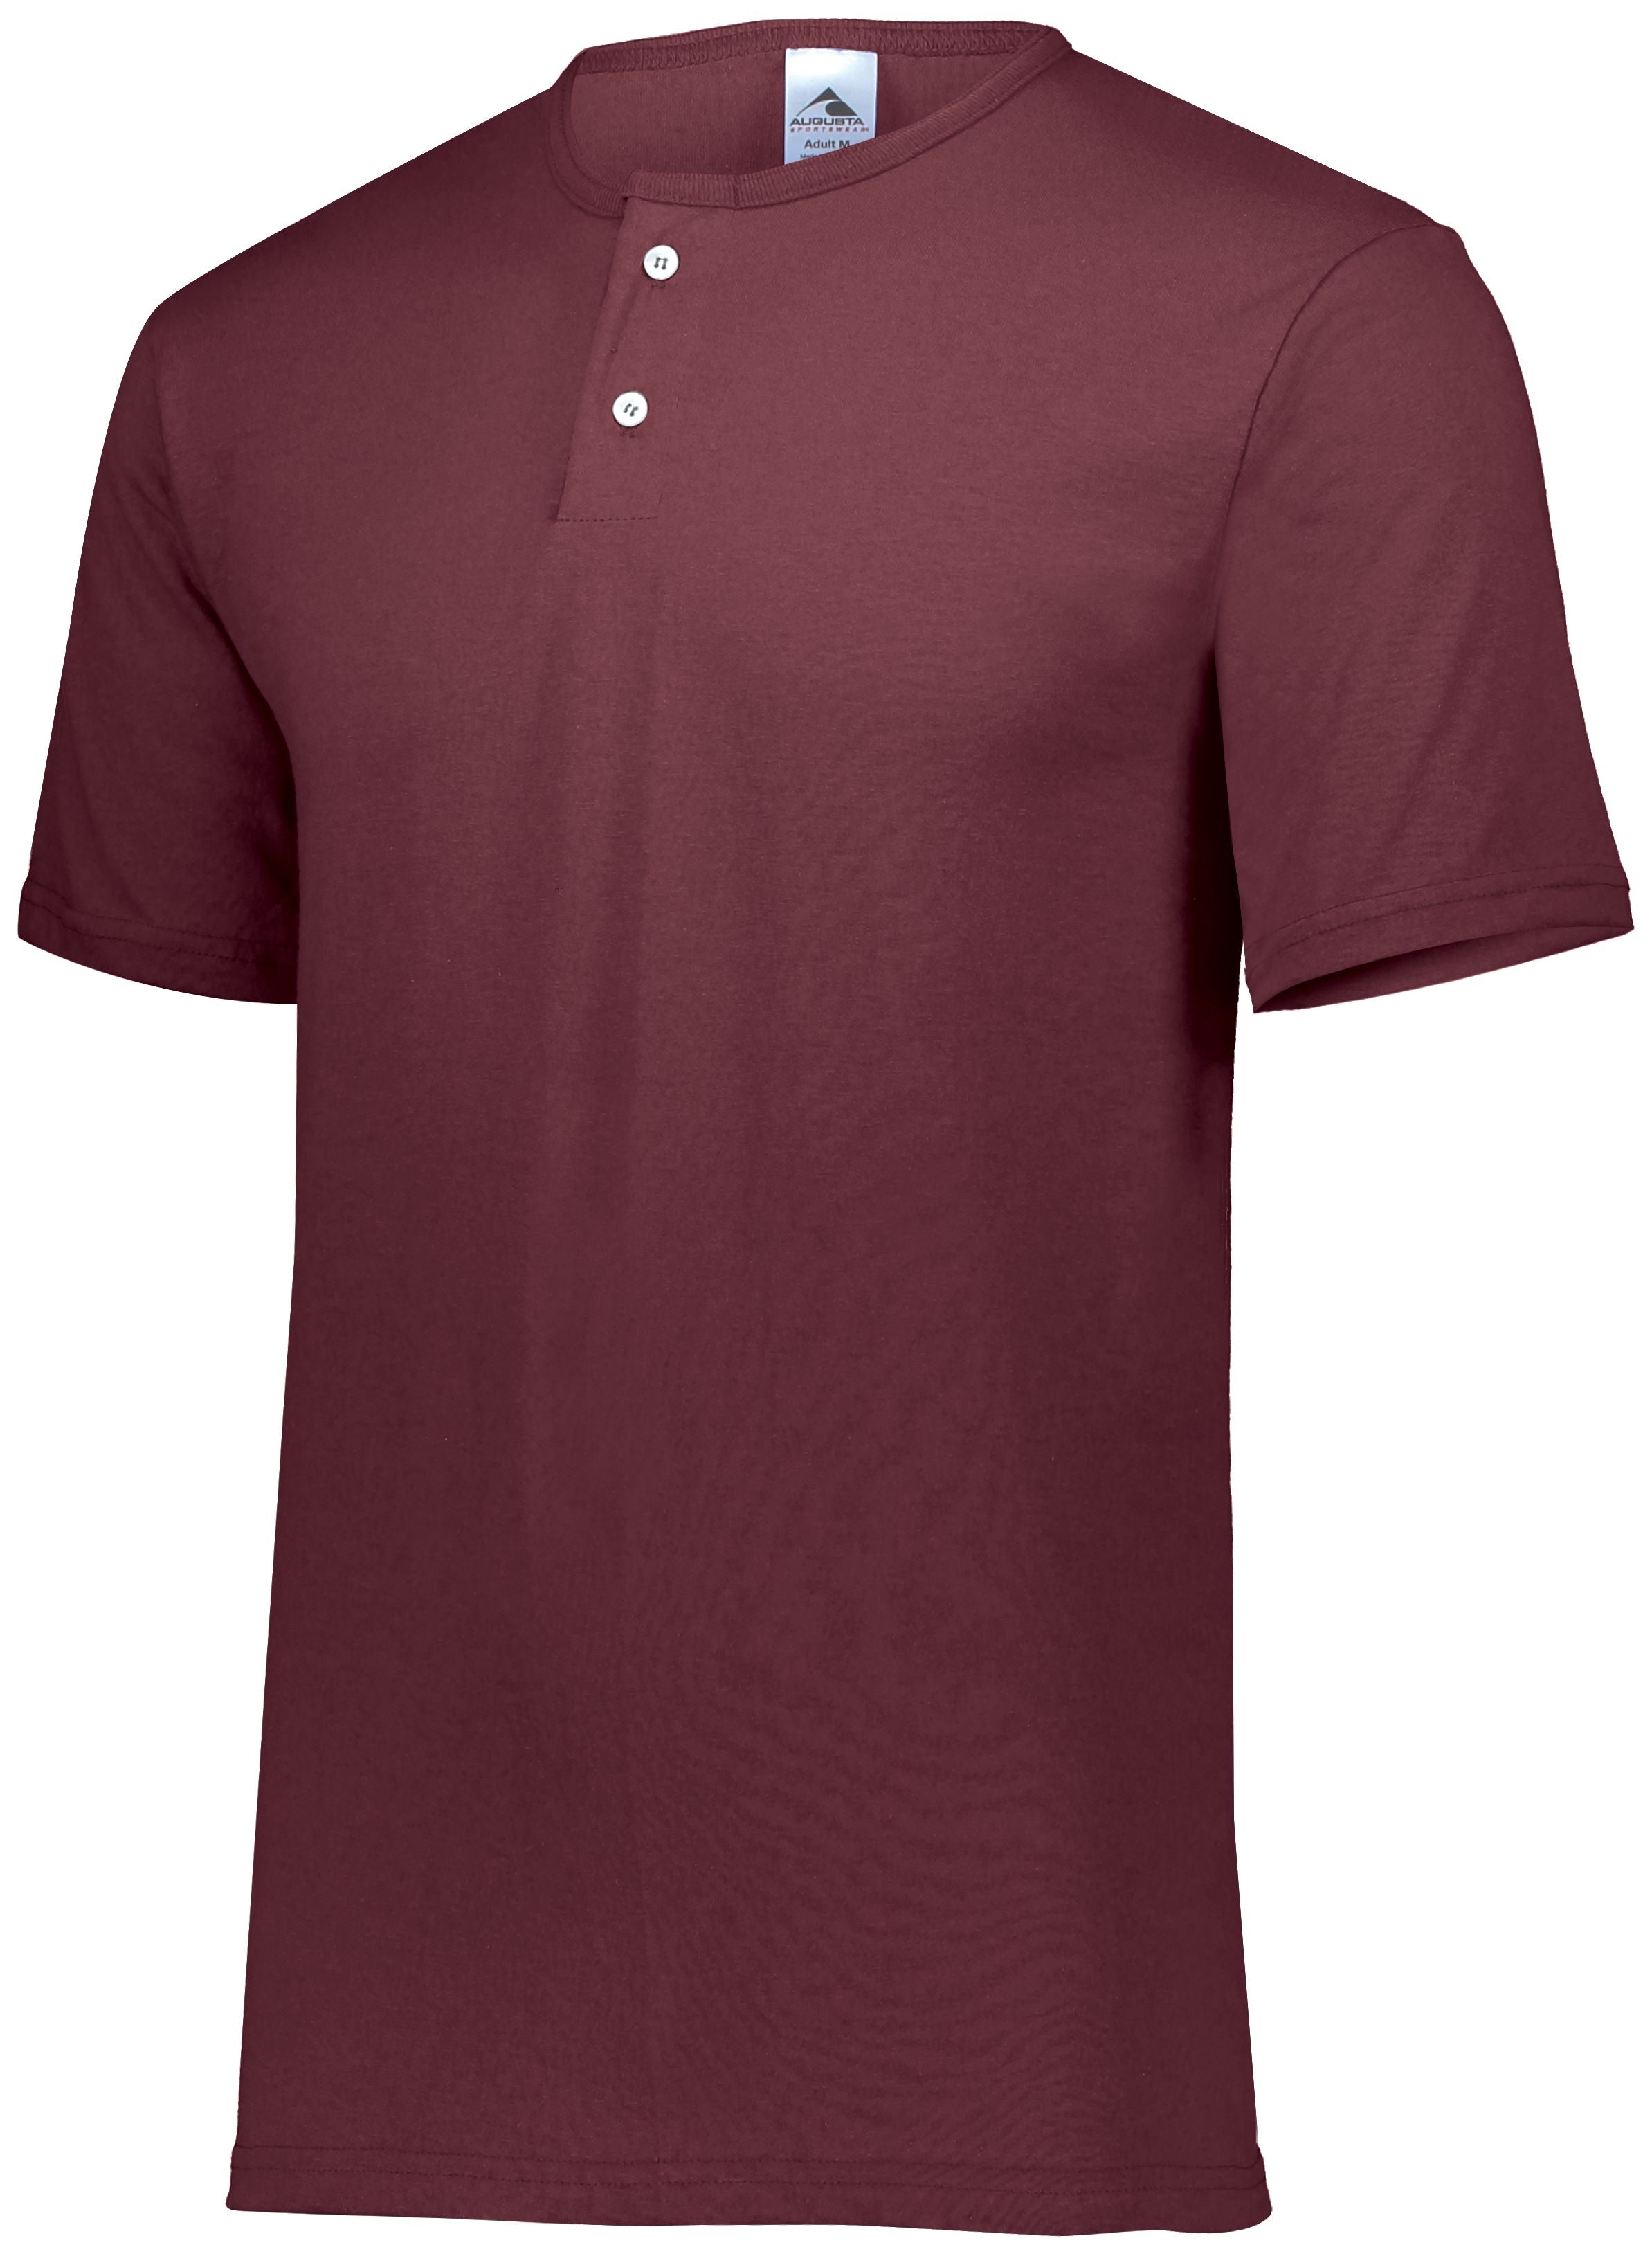 Augusta Sportswear Youth Two-Button Baseball Jersey in Maroon  -Part of the Youth, Youth-Jersey, Augusta-Products, Baseball, Shirts, All-Sports, All-Sports-1 product lines at KanaleyCreations.com